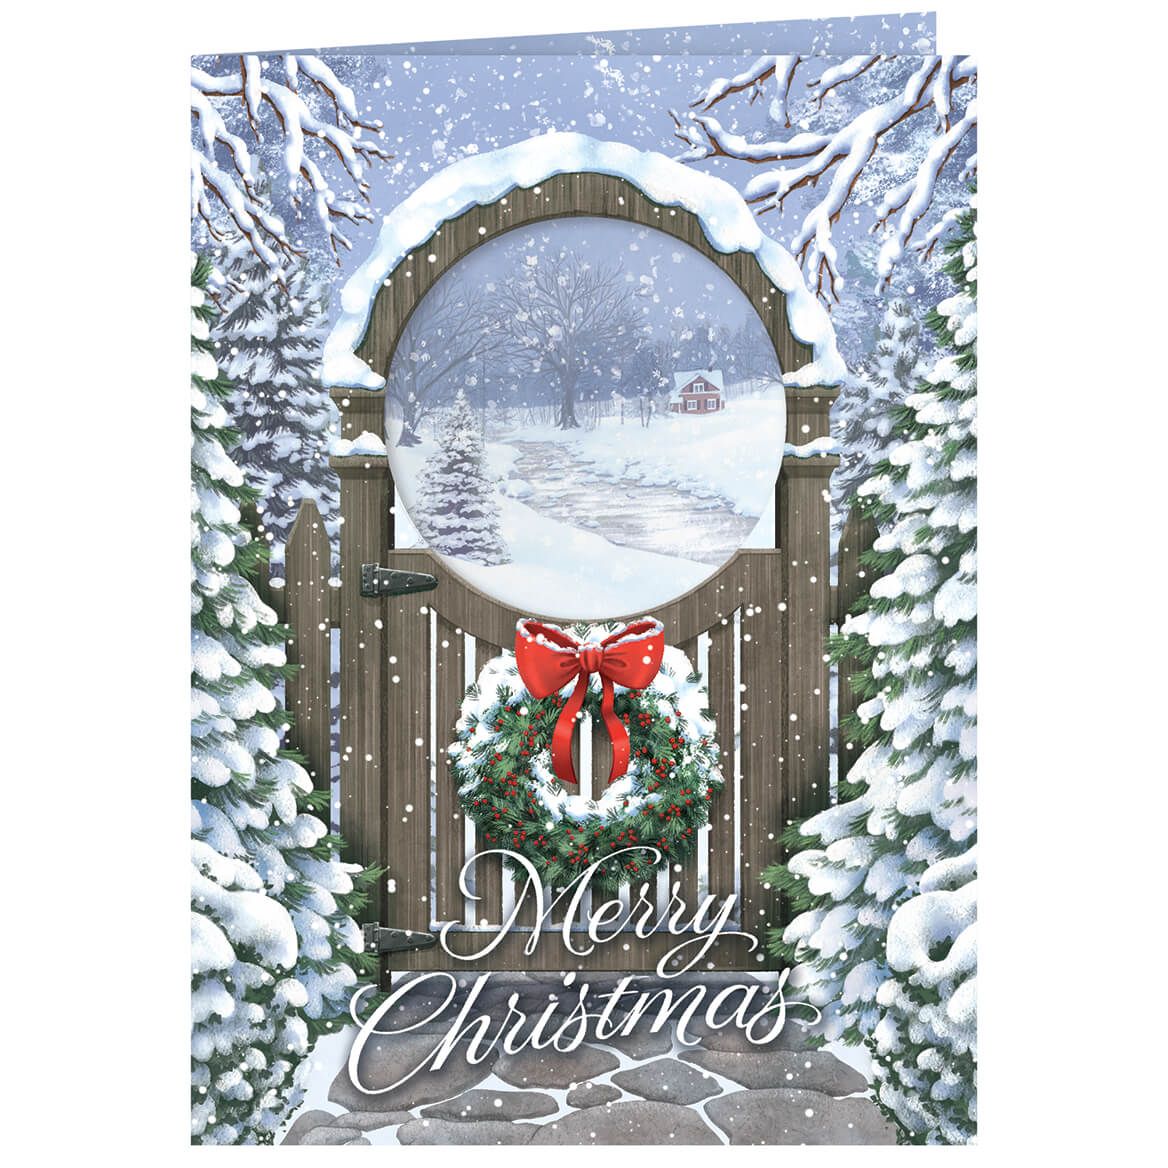 Personalized Blessings of Christmas Cards set of 20 + '-' + 370182